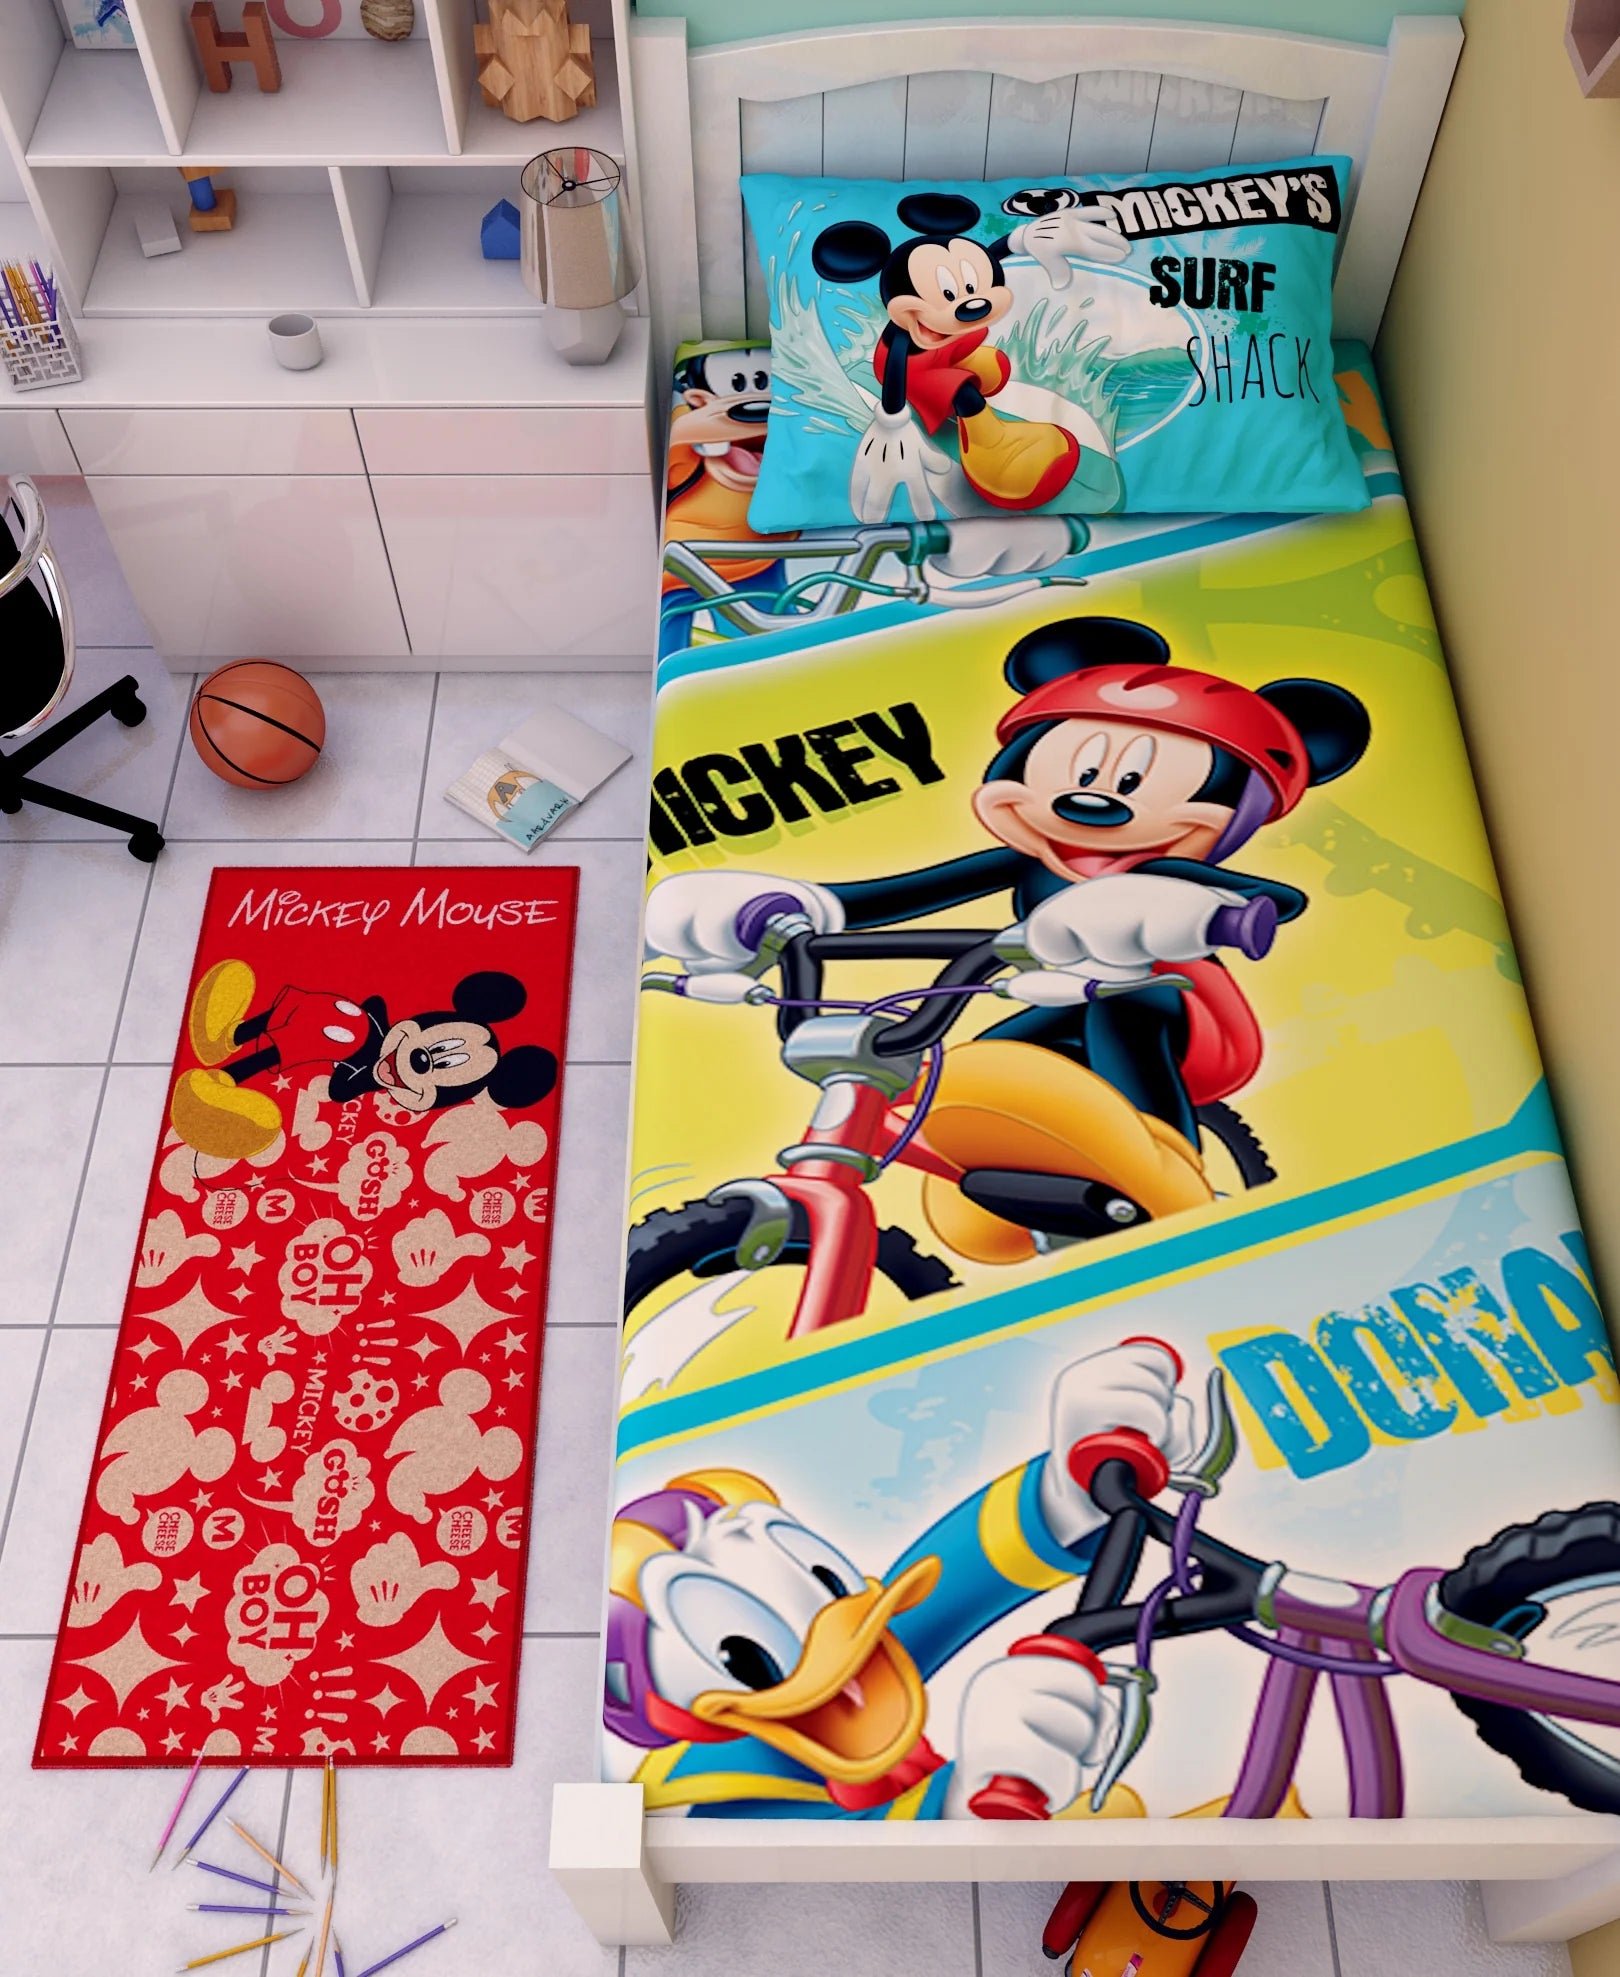 Disney Mickey's Surf Shack Mickey Mouse Cotton Single Bedsheet Set With Runner Carpet